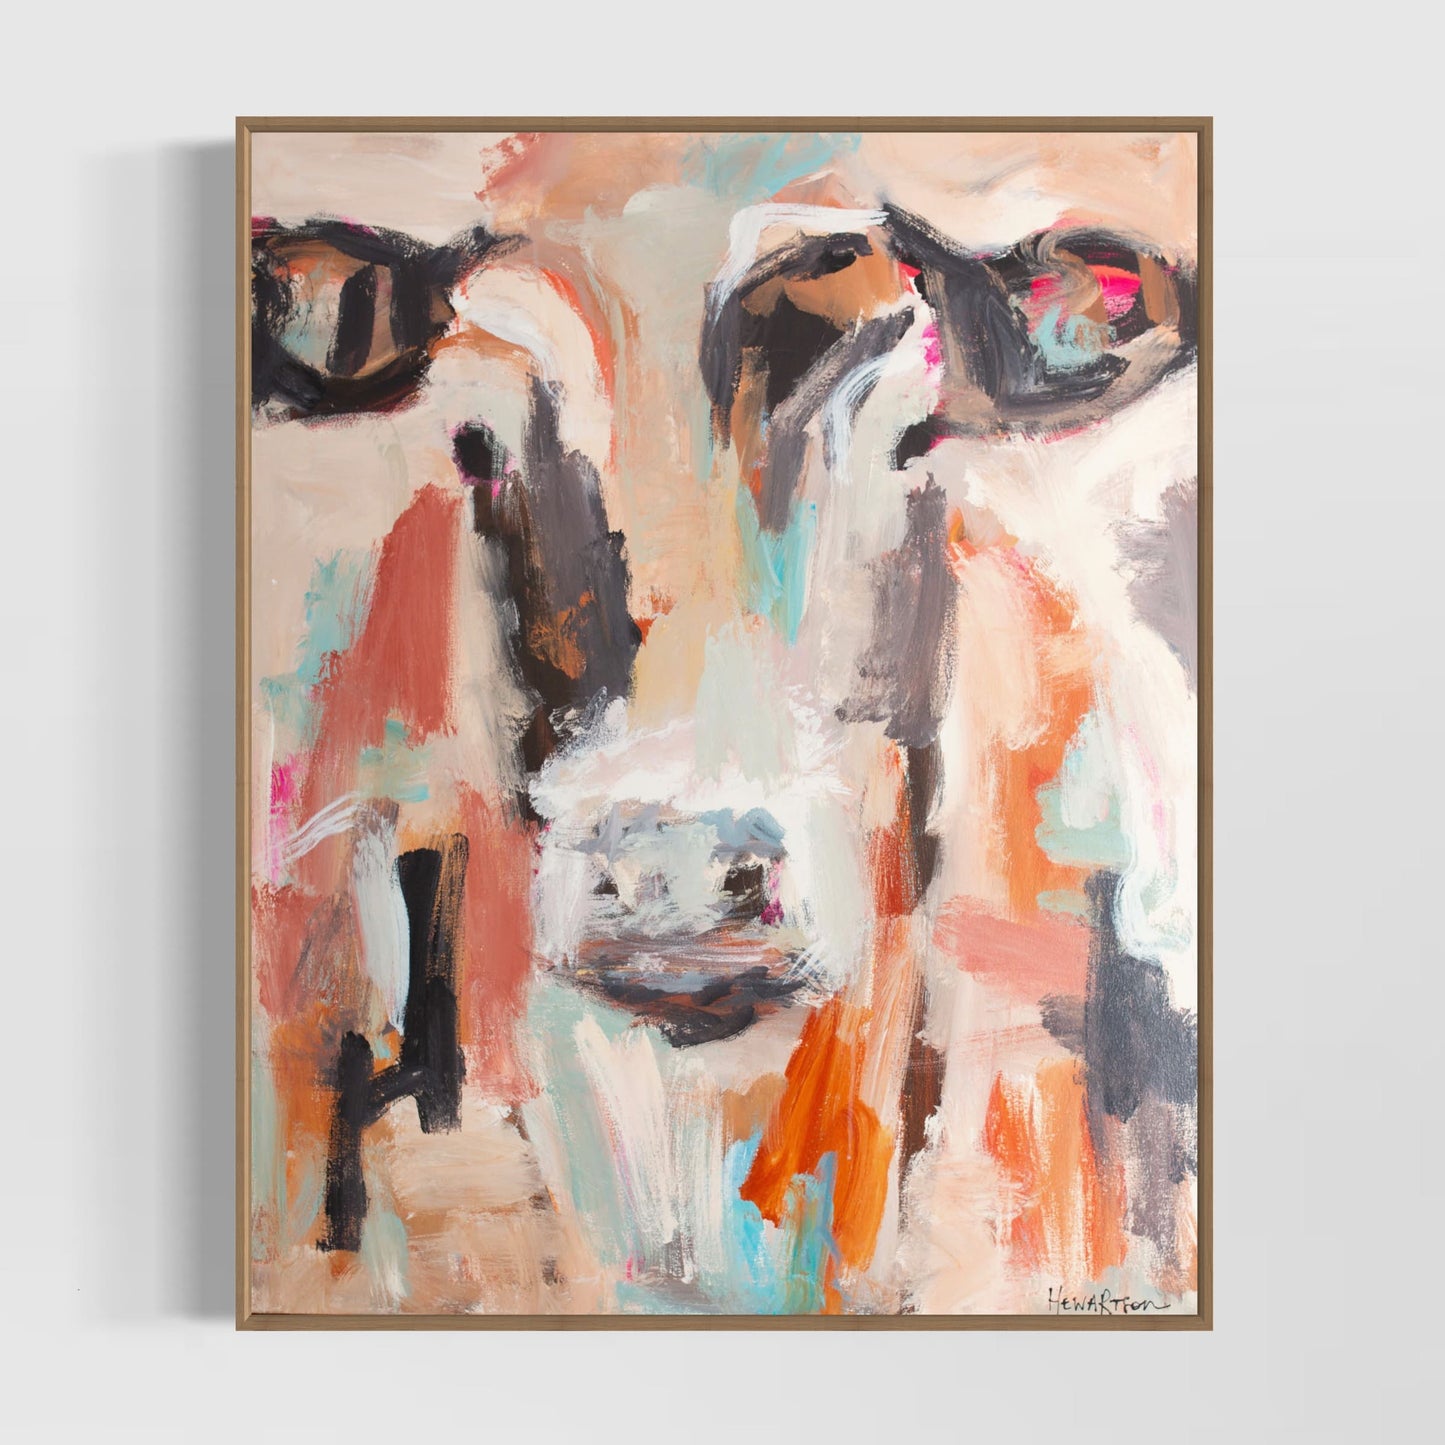 Morty  - Abstract Cow by Australian Artist Rose Hewartson Original Abstract Painting on Canvas Framed 96x123 cm Statement Piece